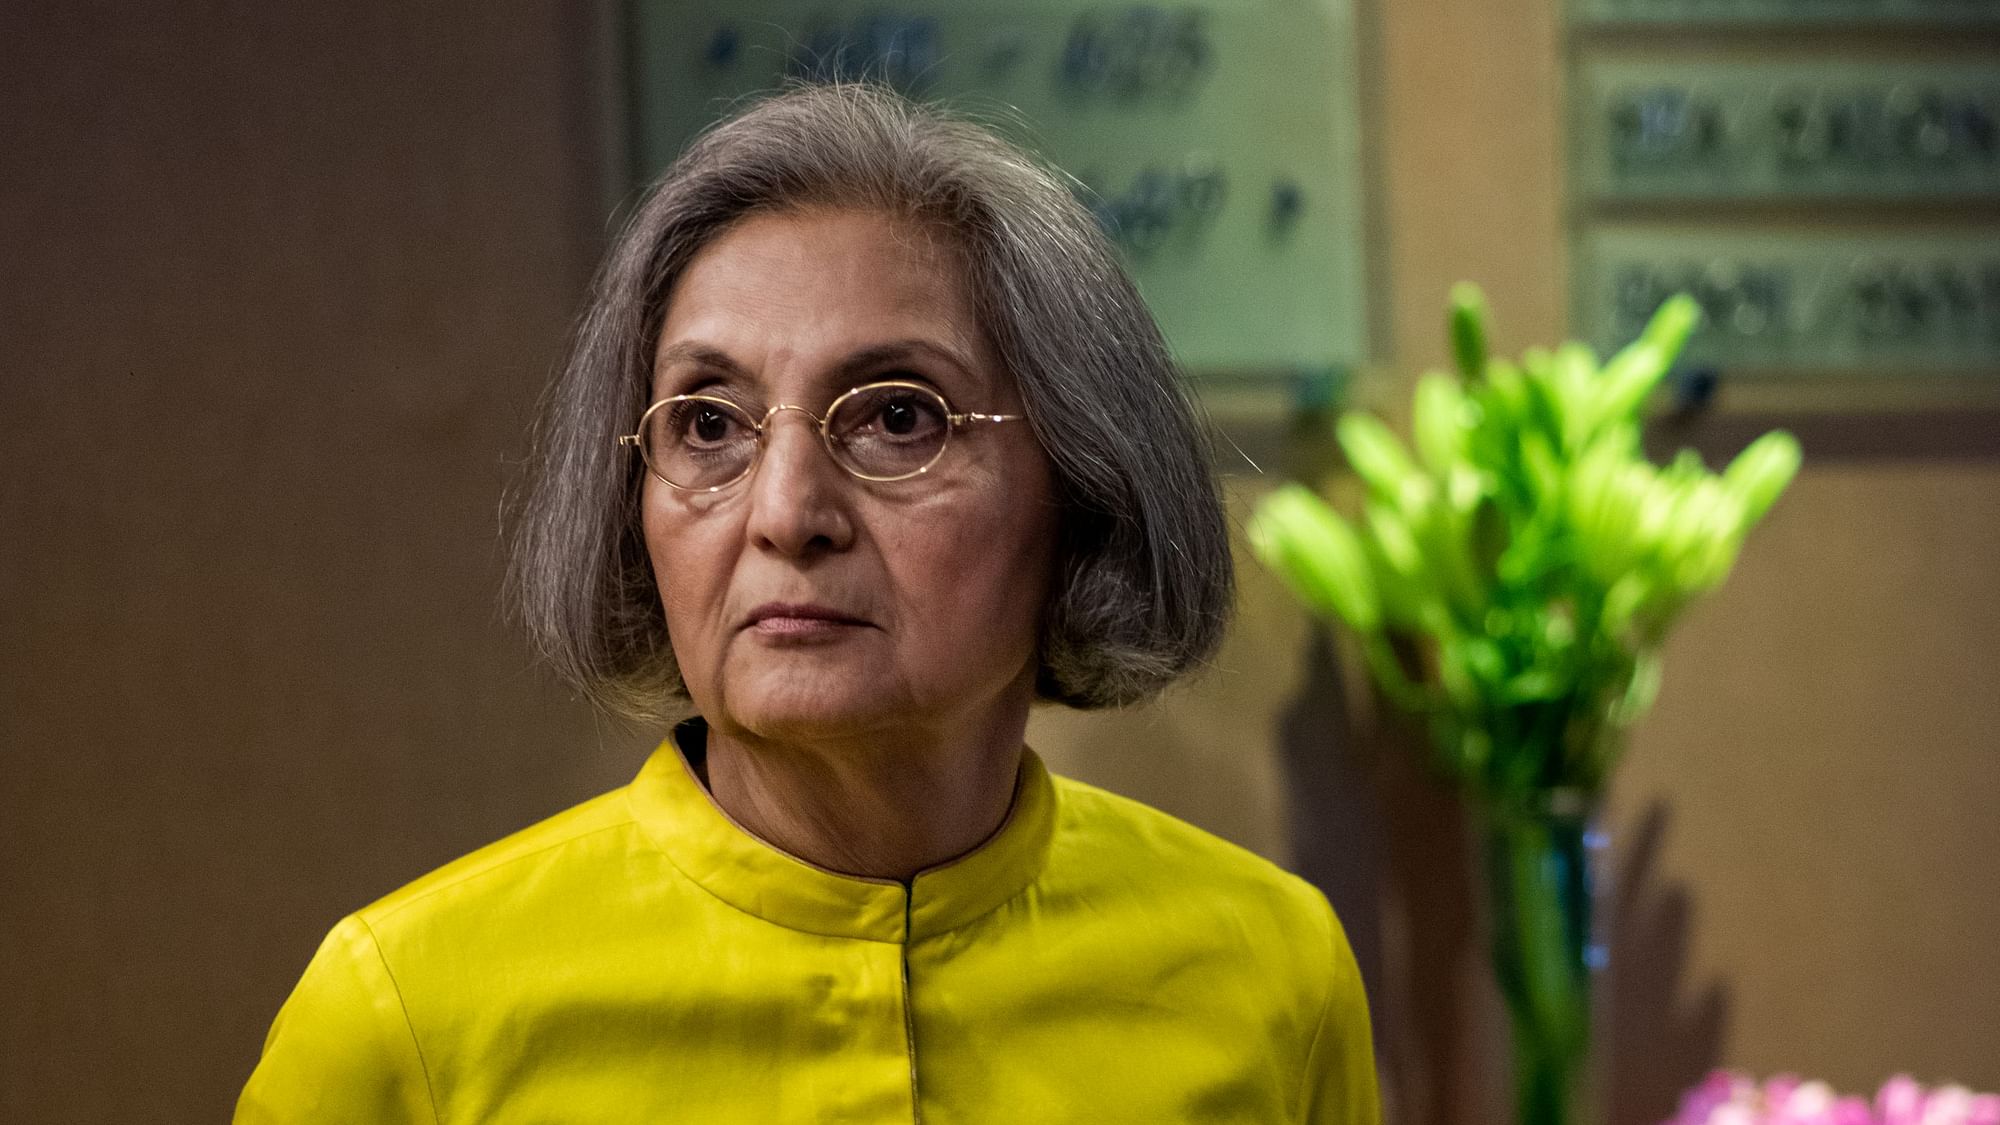 Ma Anand Sheela will be featuring in a Netflix documentary.&nbsp;